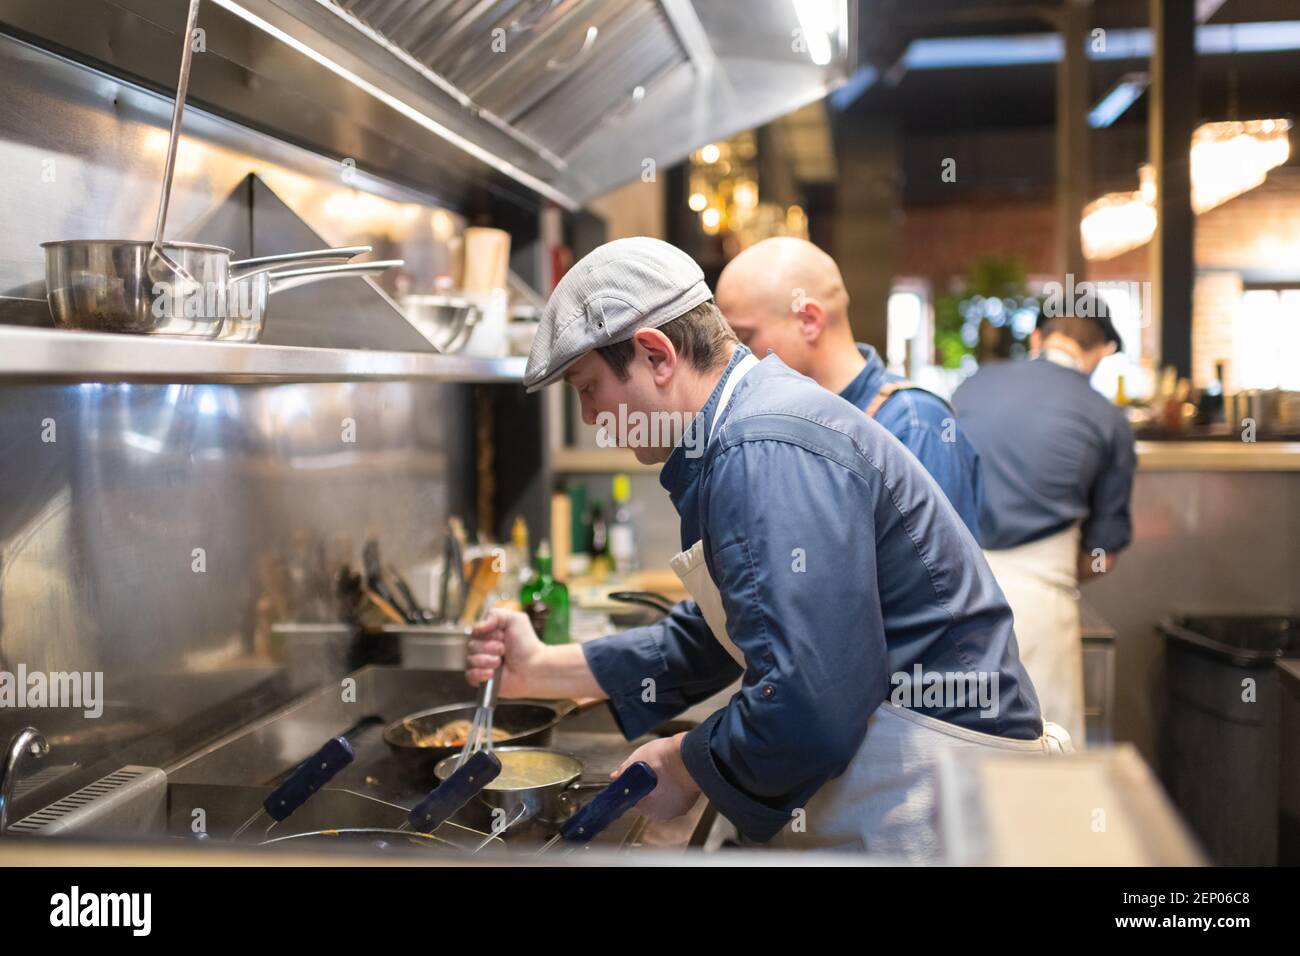 Man in cap whipping sauce in saucepan on stove while working in cafe kitchen Stock Photo